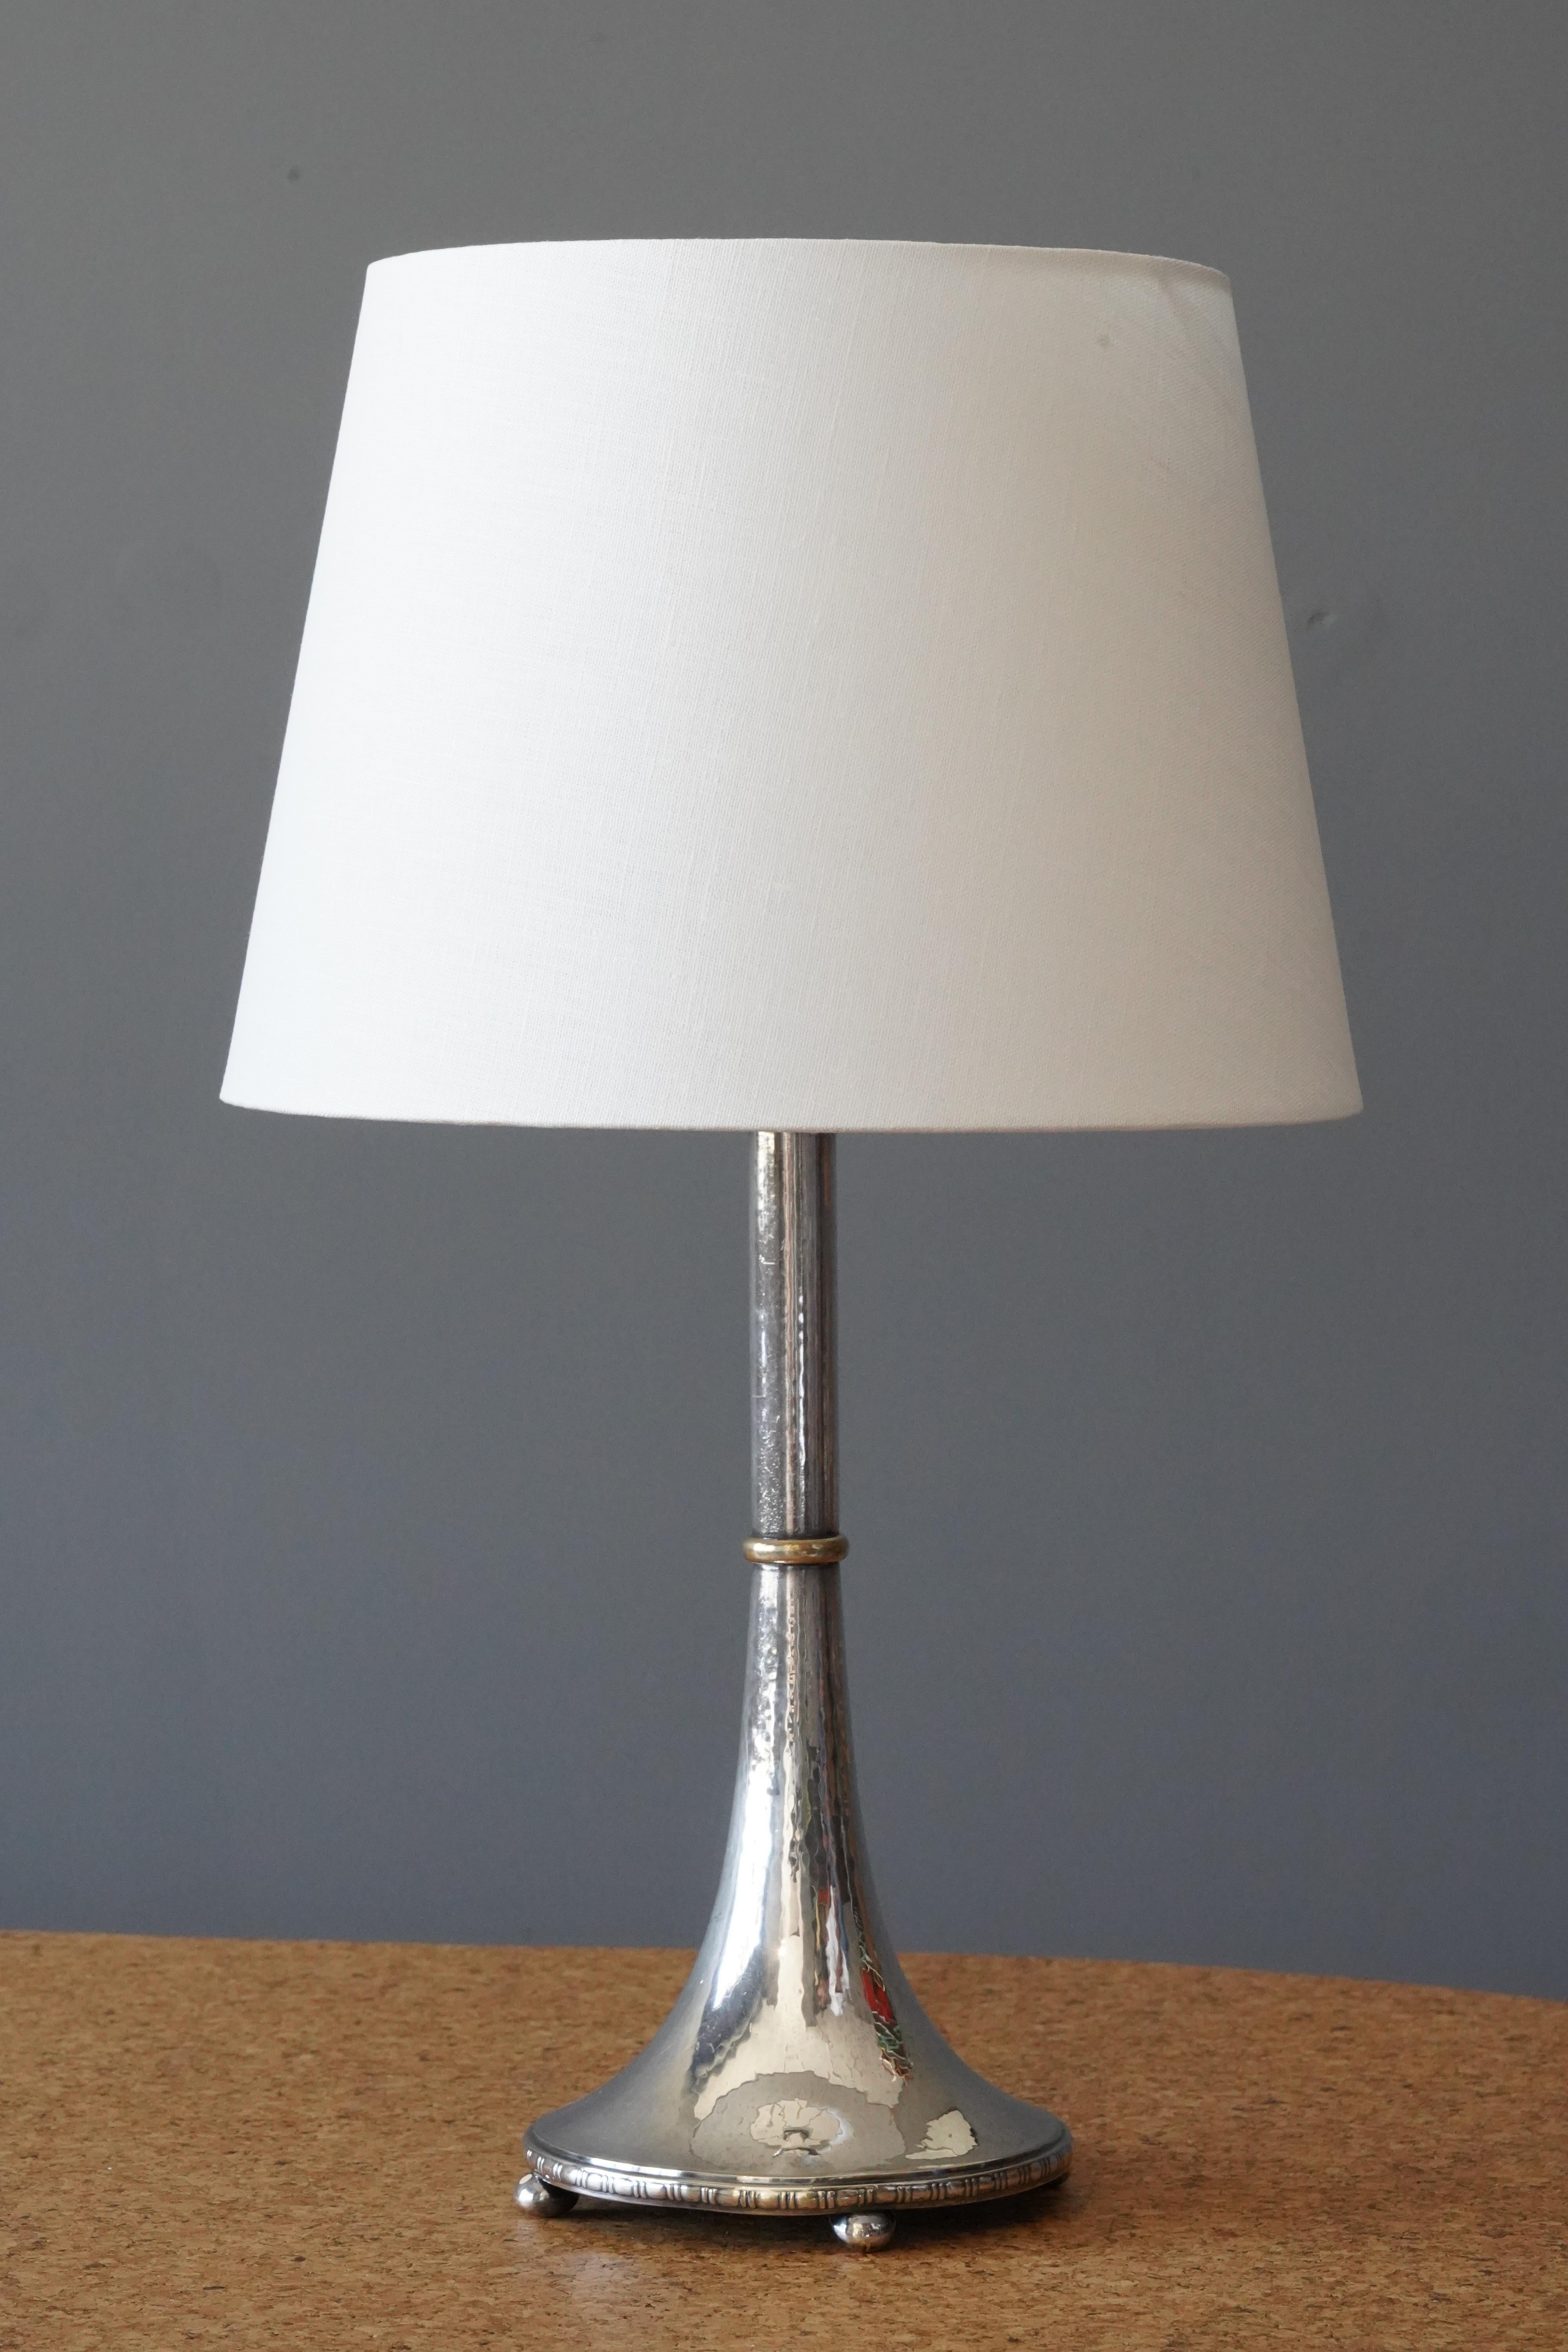 A table lamp by GAB Guldsmedsaktiebolaget. Designed and produced c. 1930s. Stamped.

Sold without lampshade. Stated dimensions exclude lampshade.